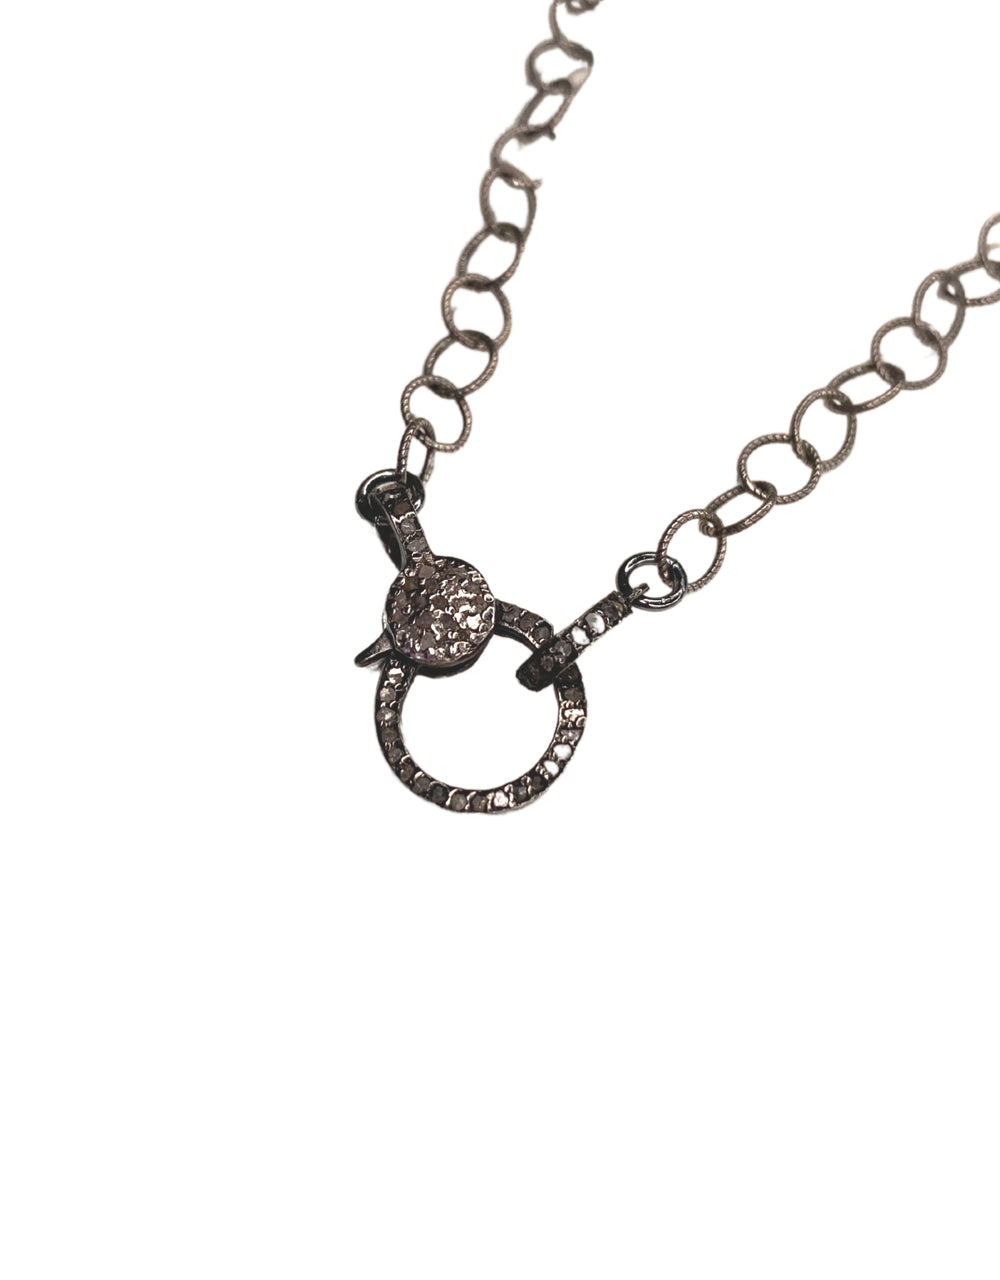 DIAMOND CLASP WITH STERLING SILVER CHAIN - Kingfisher Road - Online Boutique